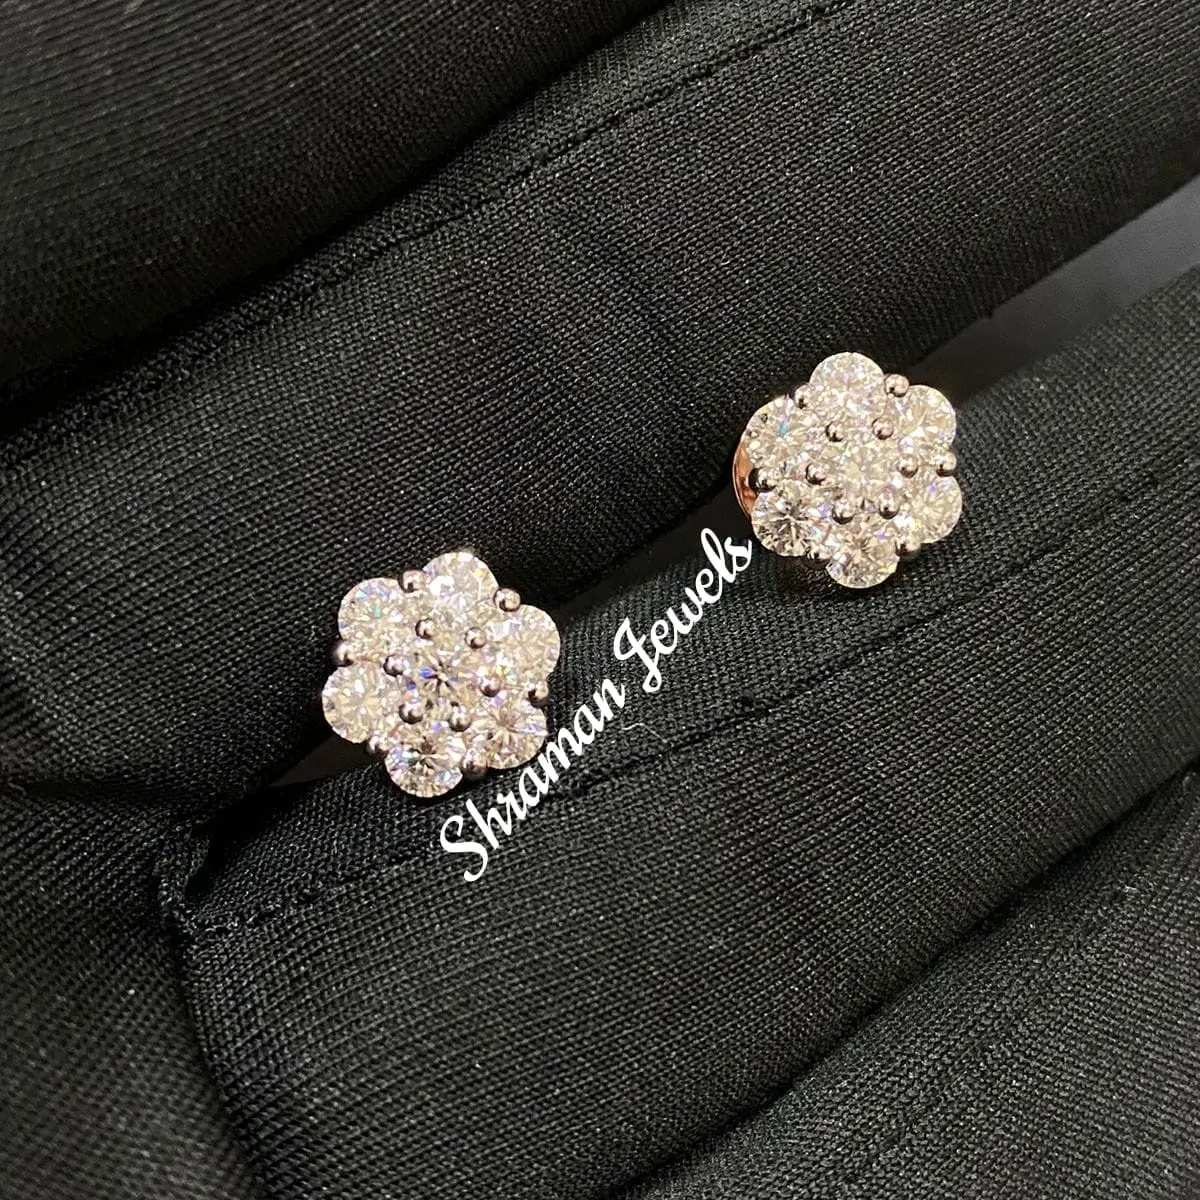 8MM  10MM  12MM Iced Out Hip Hop Pass Tester Vvs Moissanite Diamond Earrings 10K Solid Gold Jewelry Earrings Studs